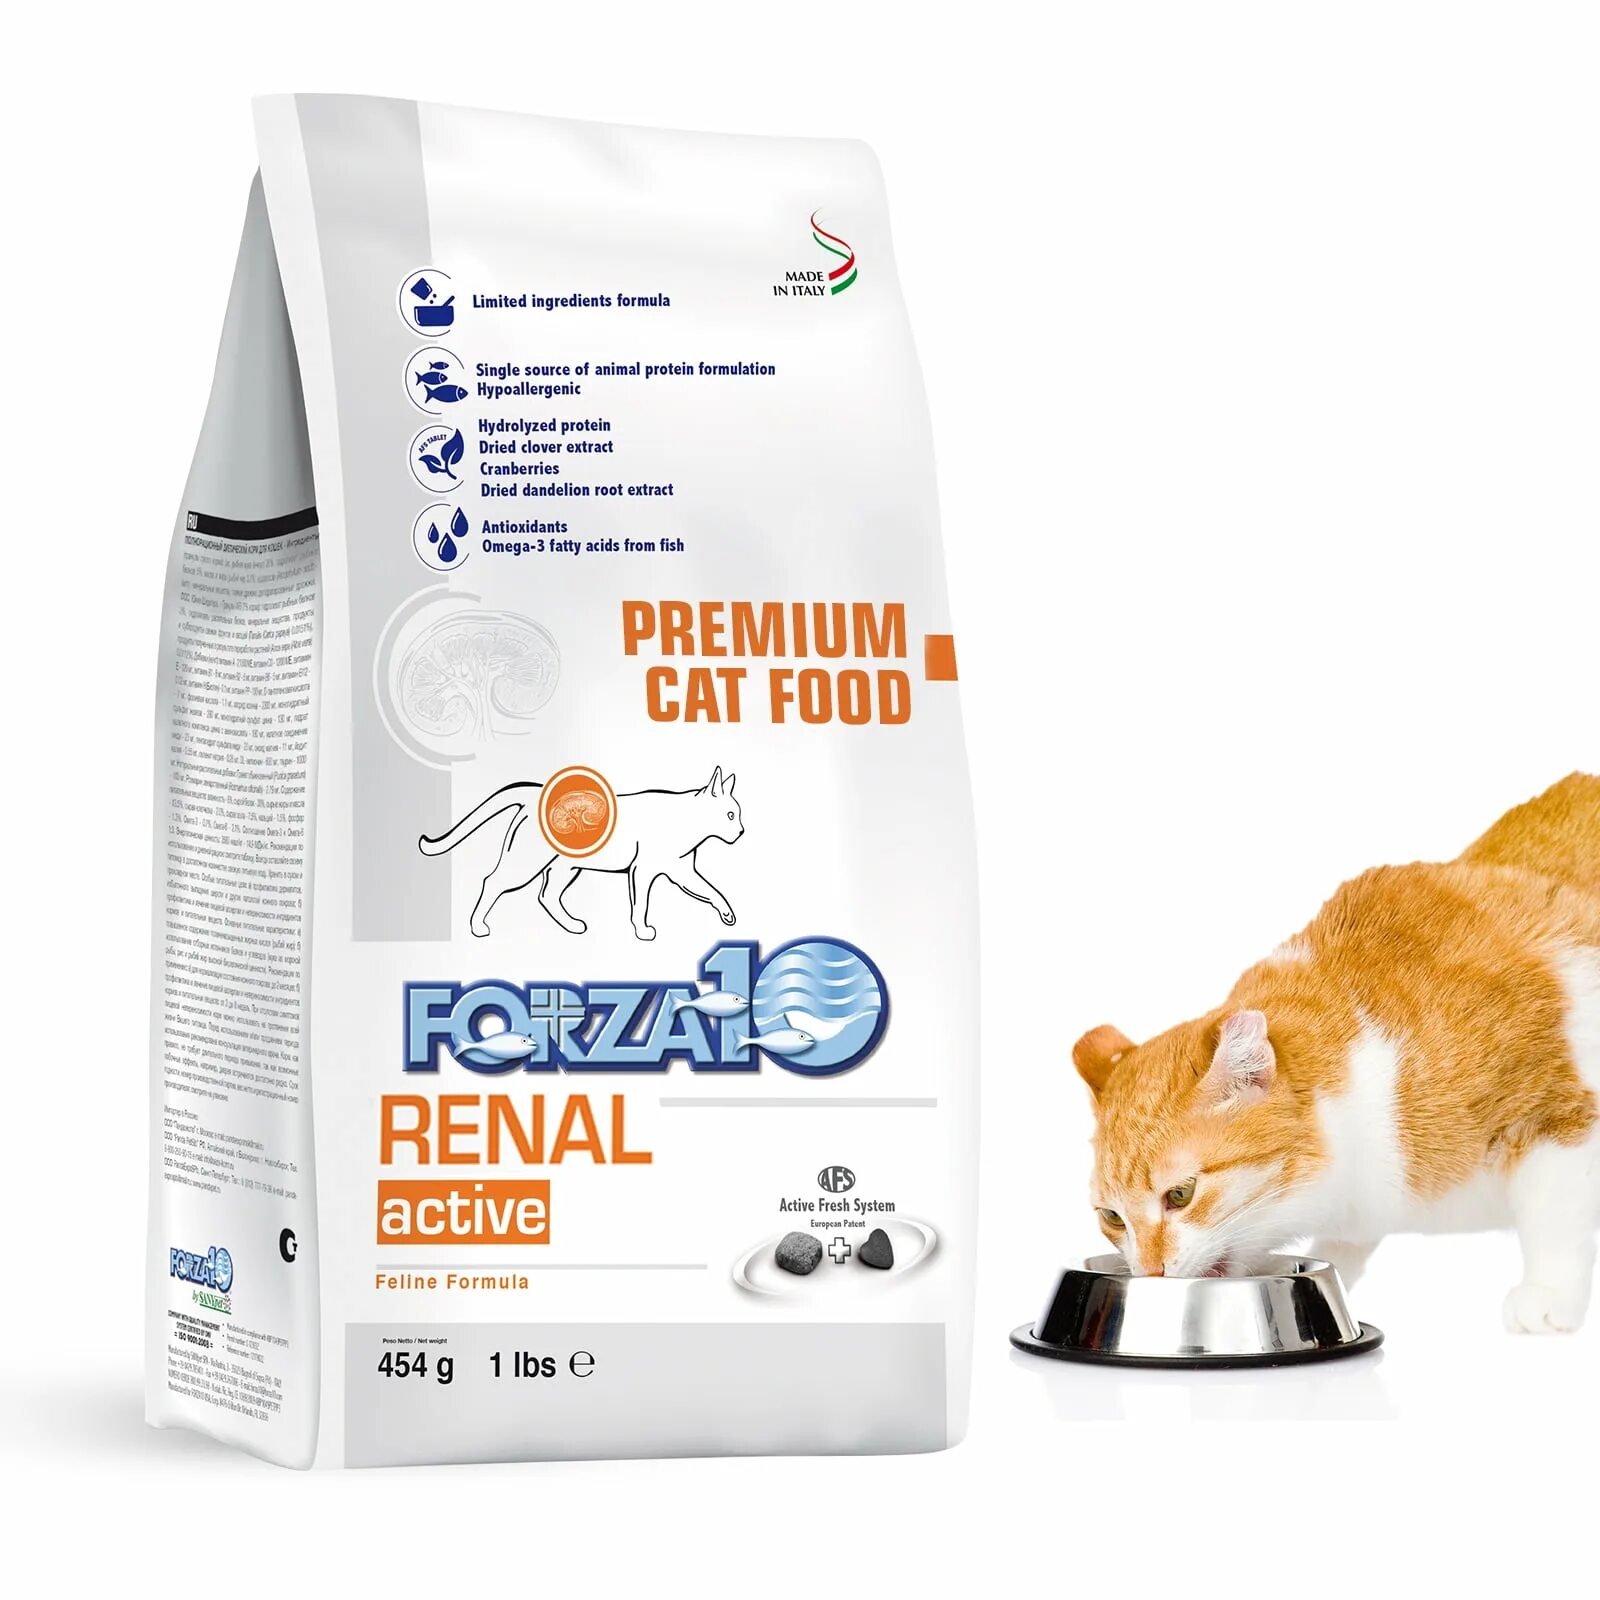 Forza10. Форза для кошек. Renal Advanced for Cat. Forza10 Dog renal Active состав. Forza10 active